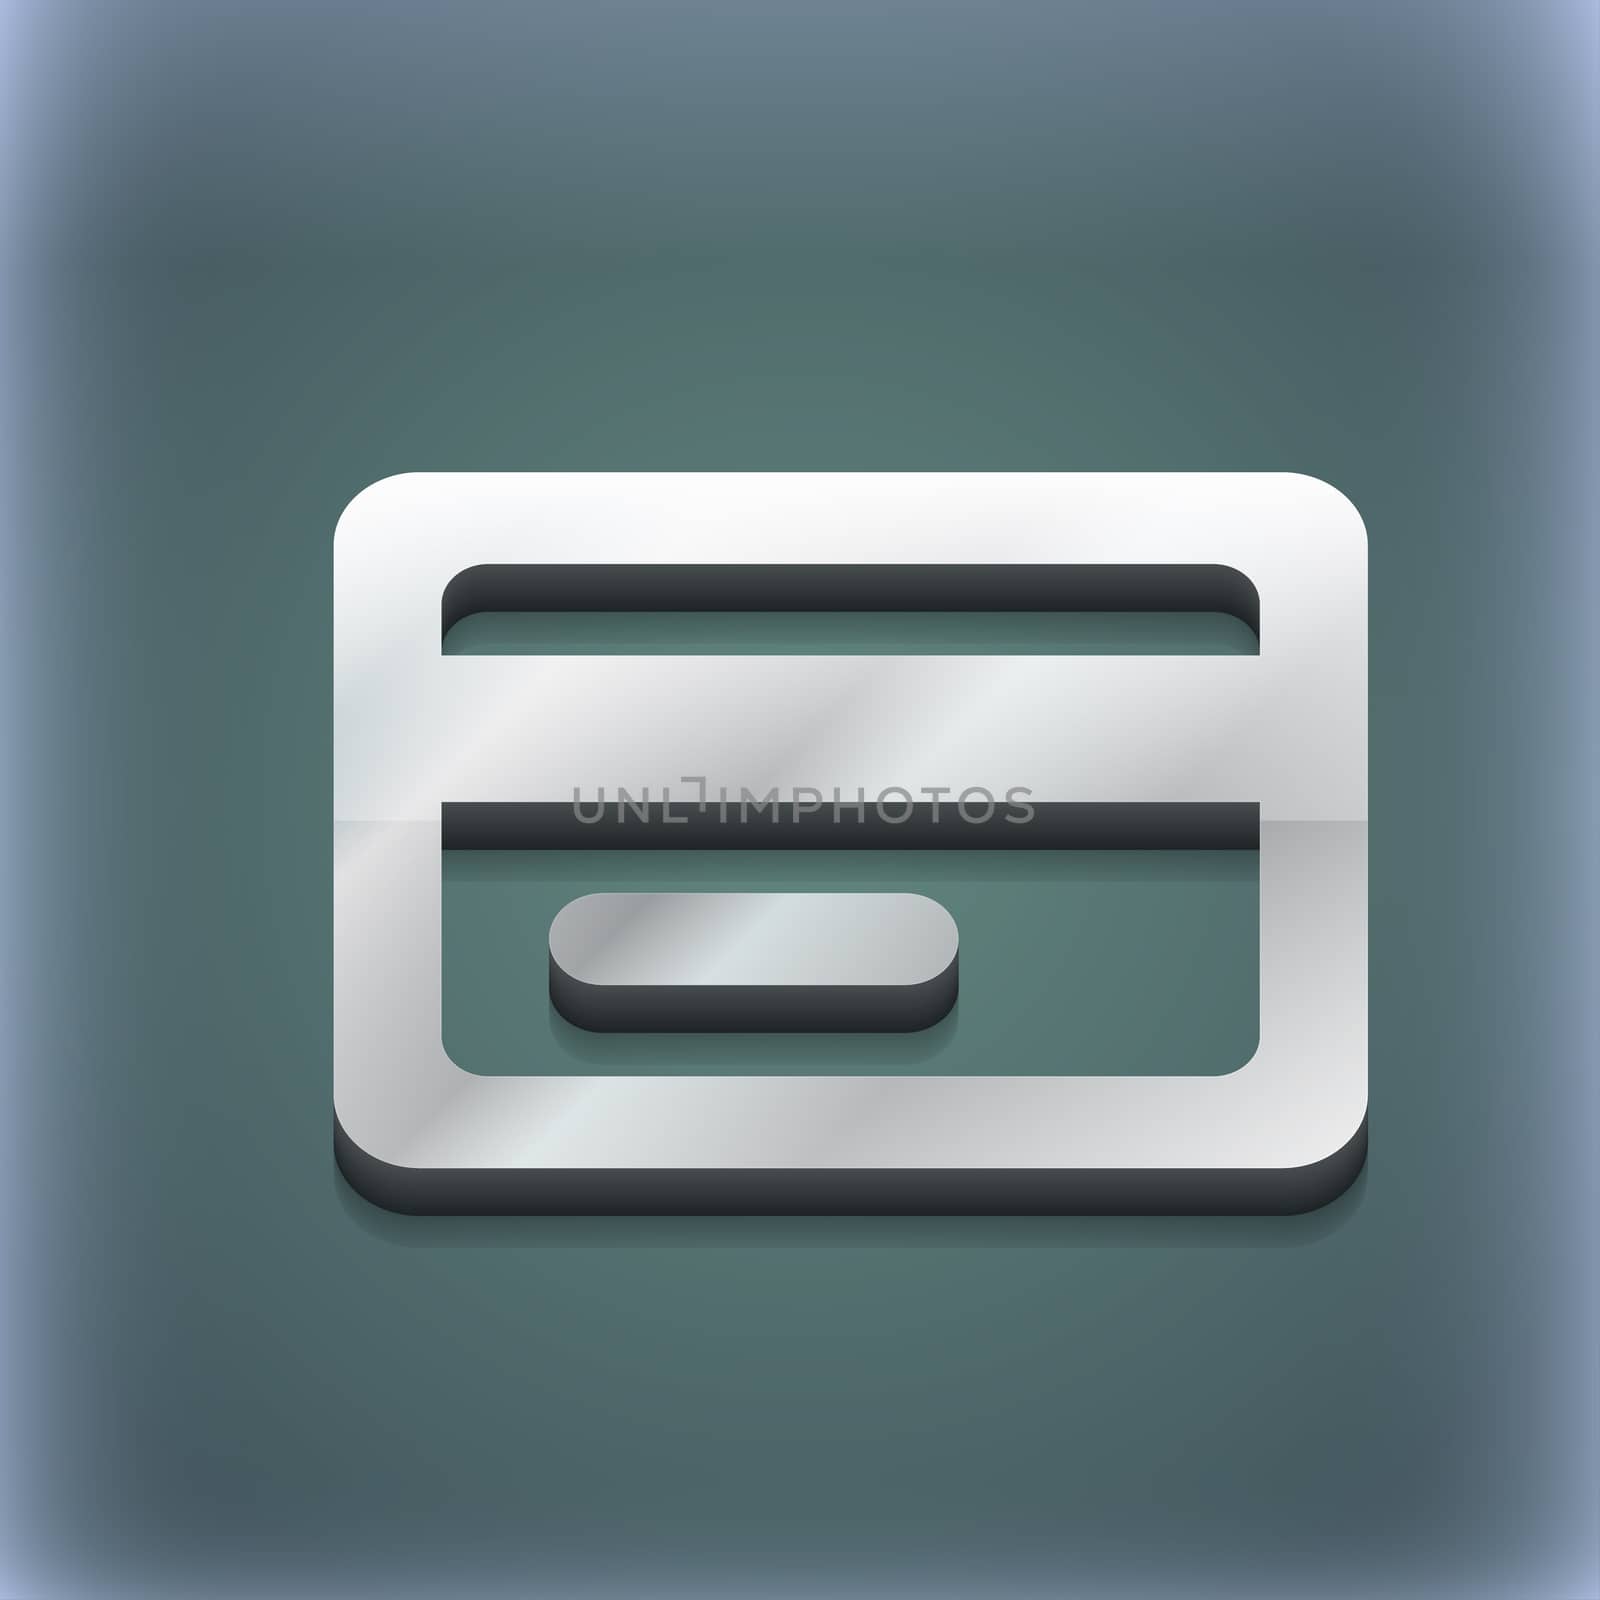 credit card icon symbol. 3D style. Trendy, modern design with space for your text illustration. Raster version